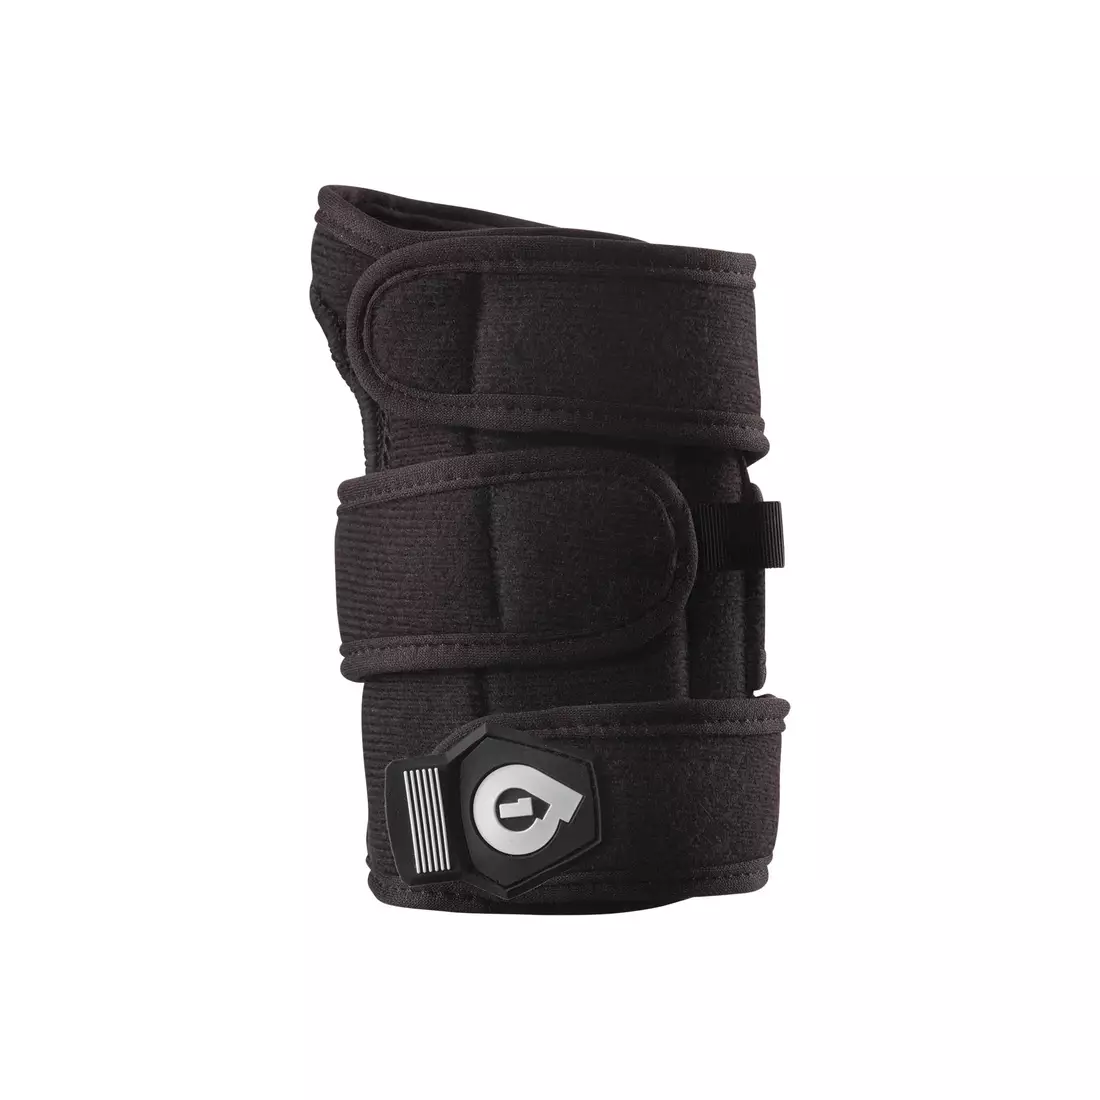 661 WRIST WRAP right wrist protector for the bicycle